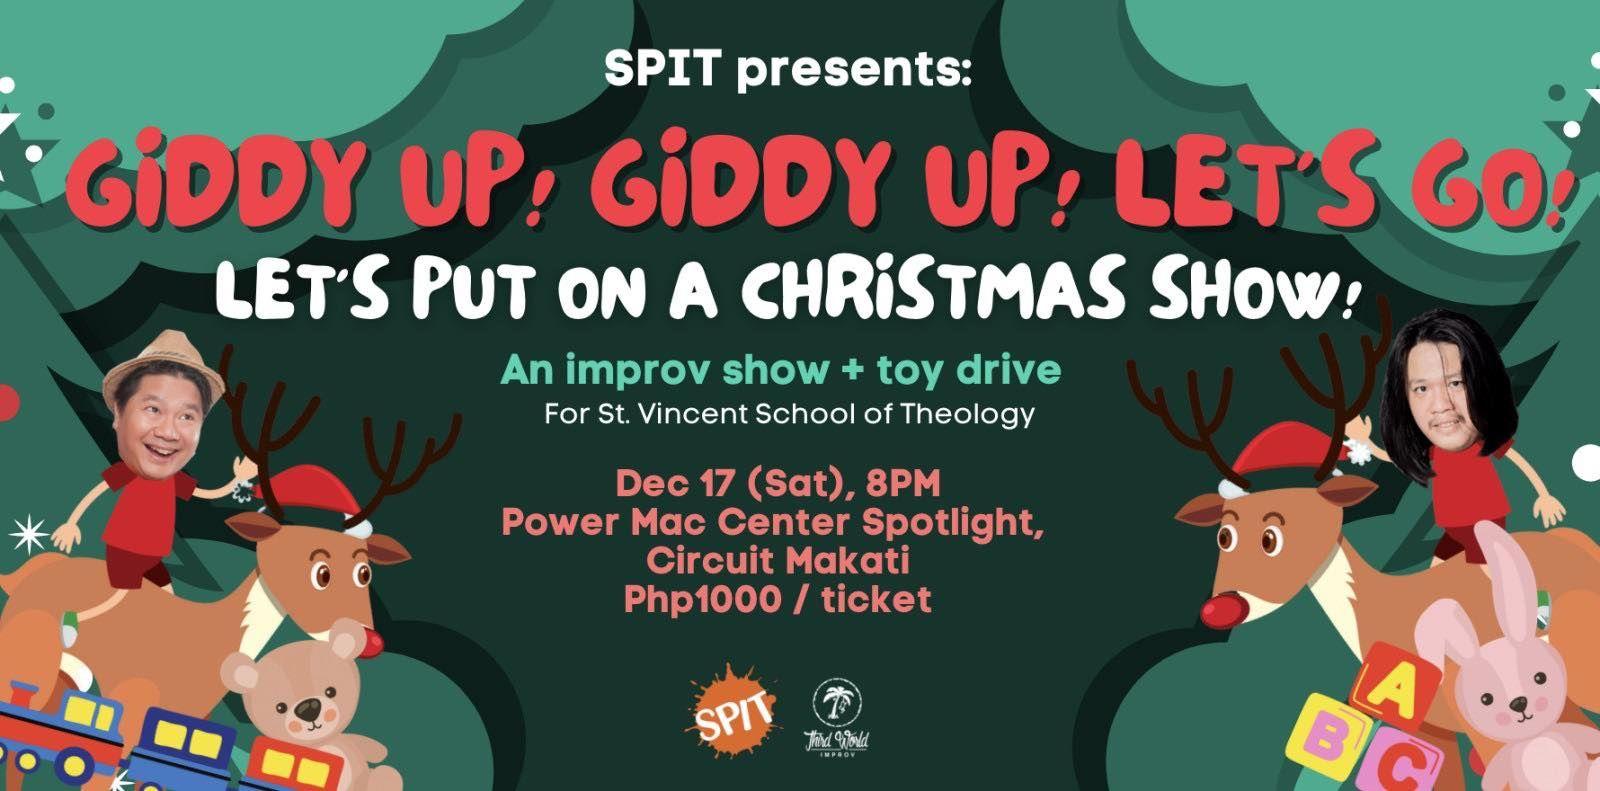 Giddy up! Giddy up! Let's Go! A SPIT Christmas Show Poster